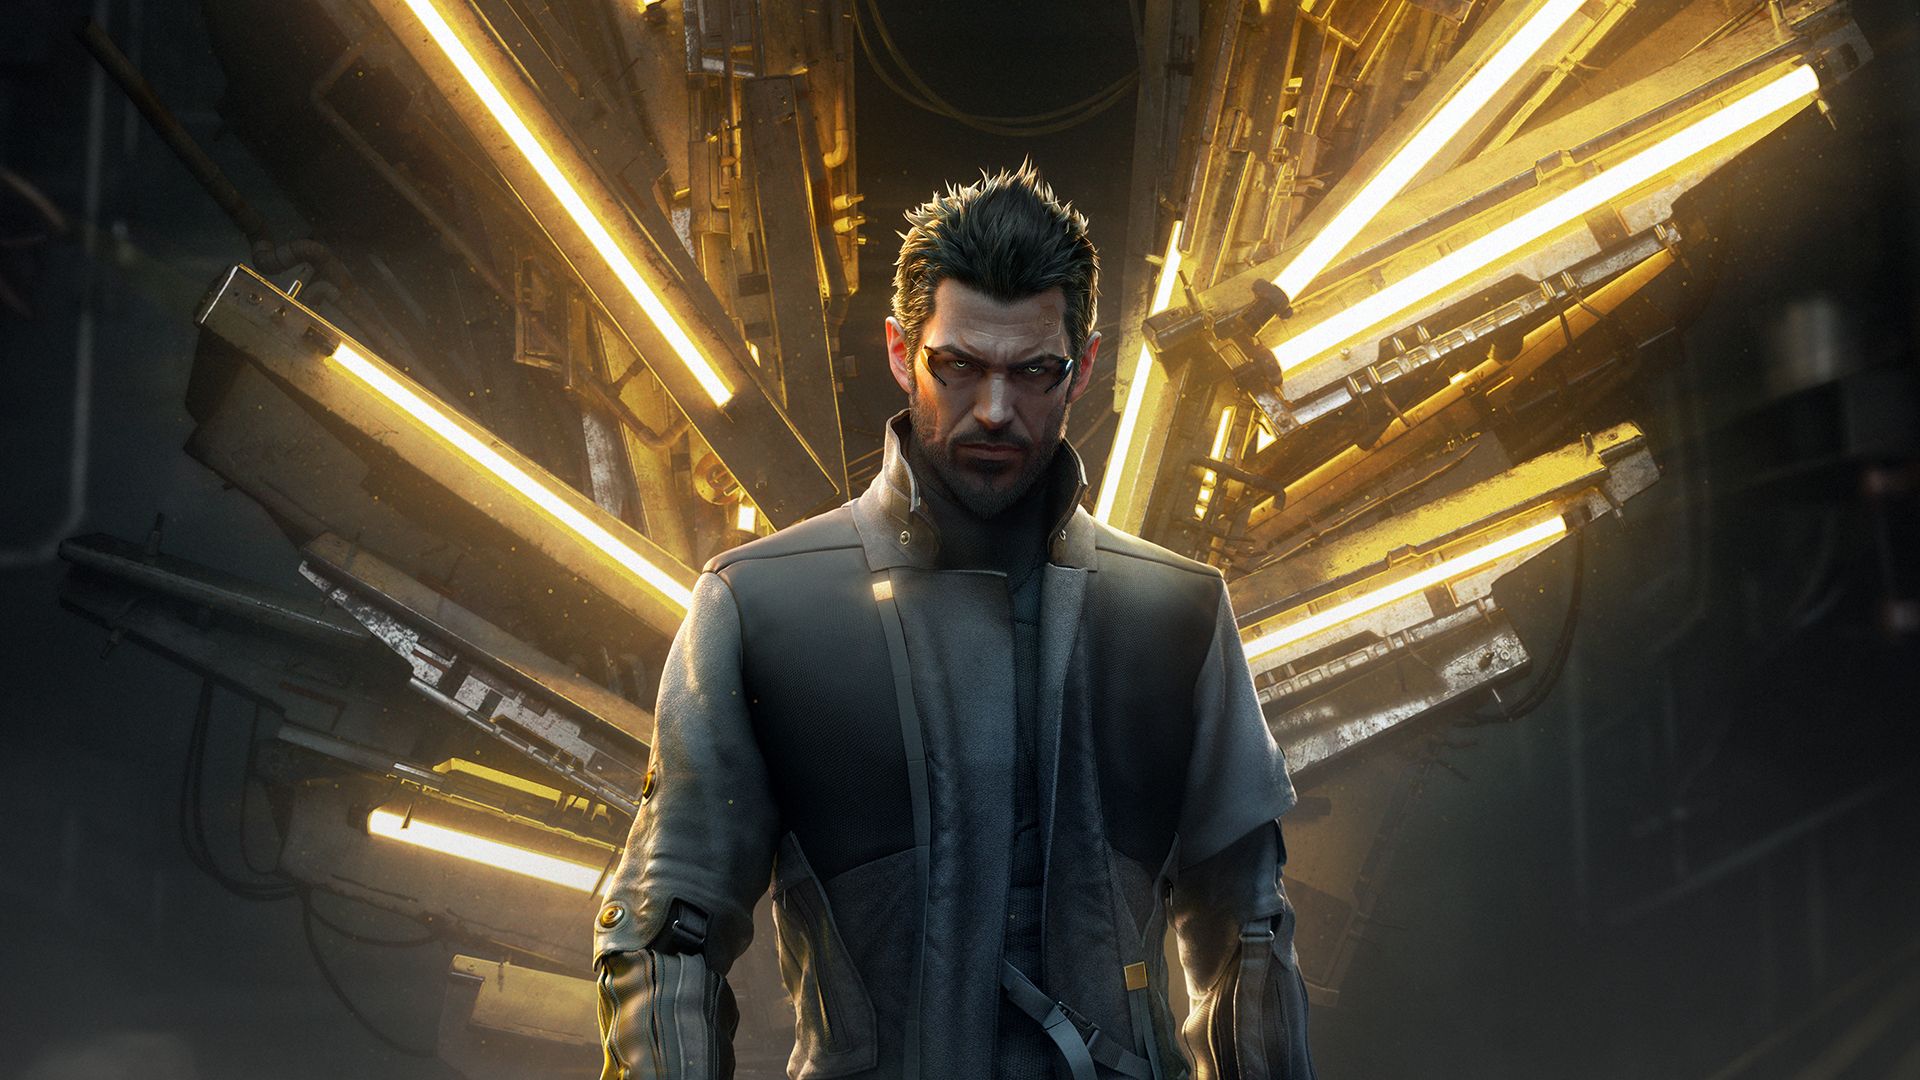 Image for You'll be able to pre-load Deus Ex: Mankind Divided on PS4 and Xbox One, too